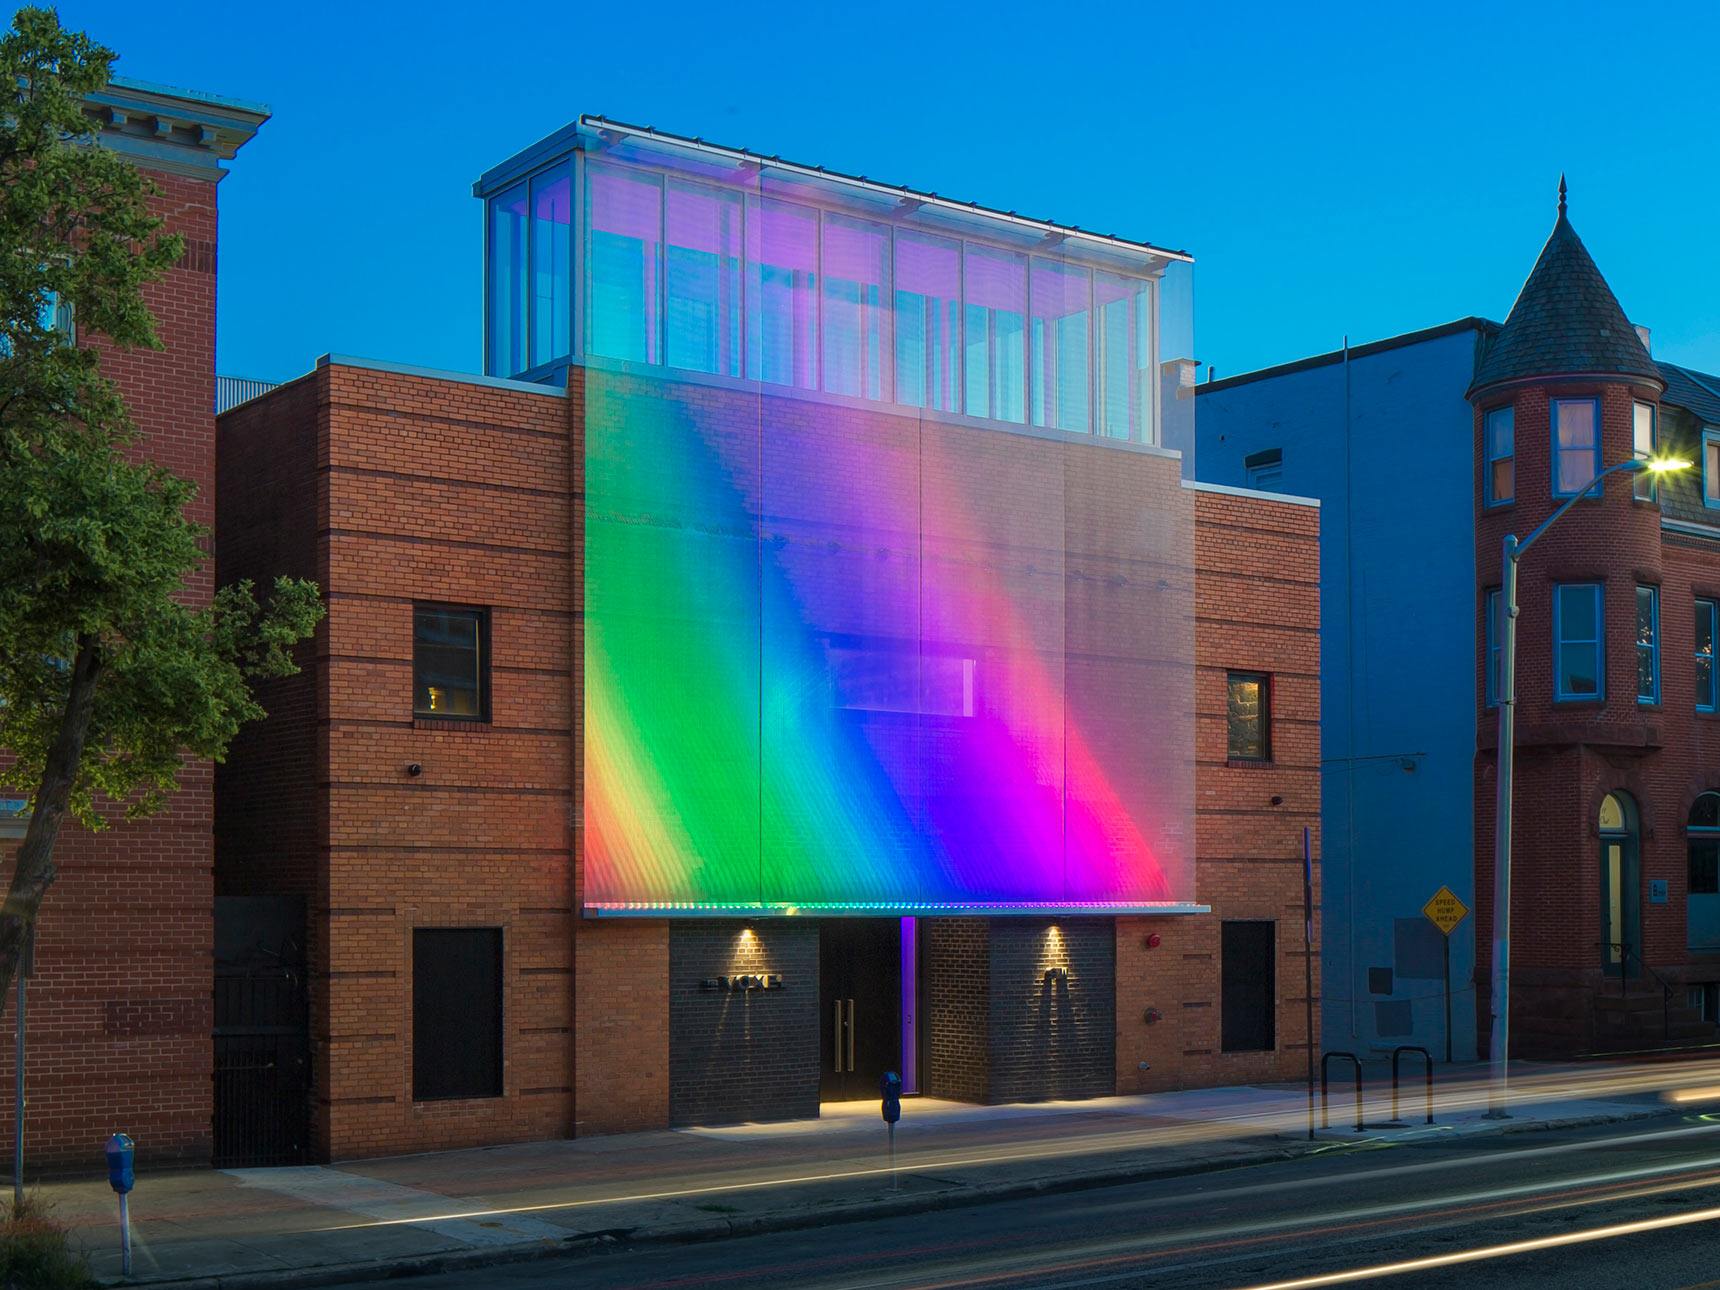 The exterior metal mesh screen facade of the Voxel Theater in Baltimore lit up at night in rainbow colors